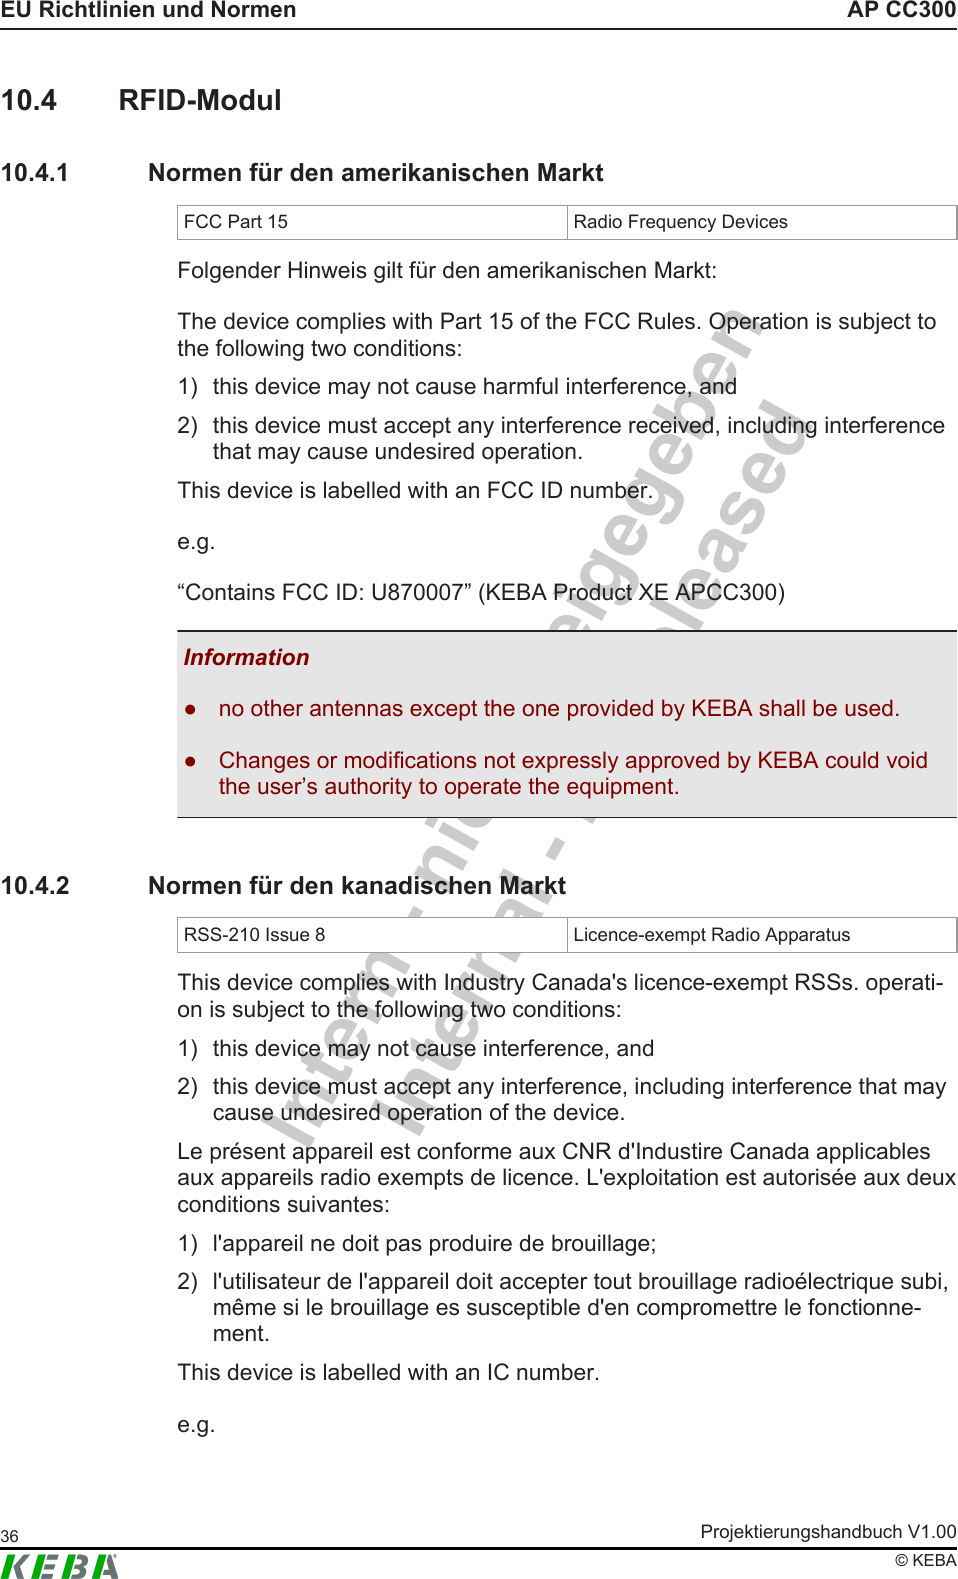 Intern - nicht freigegebenInternal - not releasedAP CC300EU Richtlinien und NormenProjektierungshandbuch V1.0036© KEBA10.4 RFID-Modul10.4.1 Normen für den amerikanischen MarktFCC Part 15 Radio Frequency DevicesFolgender Hinweis gilt für den amerikanischen Markt:The device complies with Part 15 of the FCC Rules. Operation is subject tothe following two conditions:1) this device may not cause harmful interference, and2) this device must accept any interference received, including interferencethat may cause undesired operation.This device is labelled with an FCC ID number.e.g.“Contains FCC ID: U870007” (KEBA Product XE APCC300)Information● no other antennas except the one provided by KEBA shall be used.● Changes or modifications not expressly approved by KEBA could voidthe user’s authority to operate the equipment.10.4.2 Normen für den kanadischen MarktRSS-210 Issue 8 Licence-exempt Radio ApparatusThis device complies with Industry Canada&apos;s licence-exempt RSSs. operati-on is subject to the following two conditions:1) this device may not cause interference, and2) this device must accept any interference, including interference that maycause undesired operation of the device.Le présent appareil est conforme aux CNR d&apos;Industire Canada applicablesaux appareils radio exempts de licence. L&apos;exploitation est autorisée aux deuxconditions suivantes:1) l&apos;appareil ne doit pas produire de brouillage;2) l&apos;utilisateur de l&apos;appareil doit accepter tout brouillage radioélectrique subi,même si le brouillage es susceptible d&apos;en compromettre le fonctionne-ment.This device is labelled with an IC number.e.g.